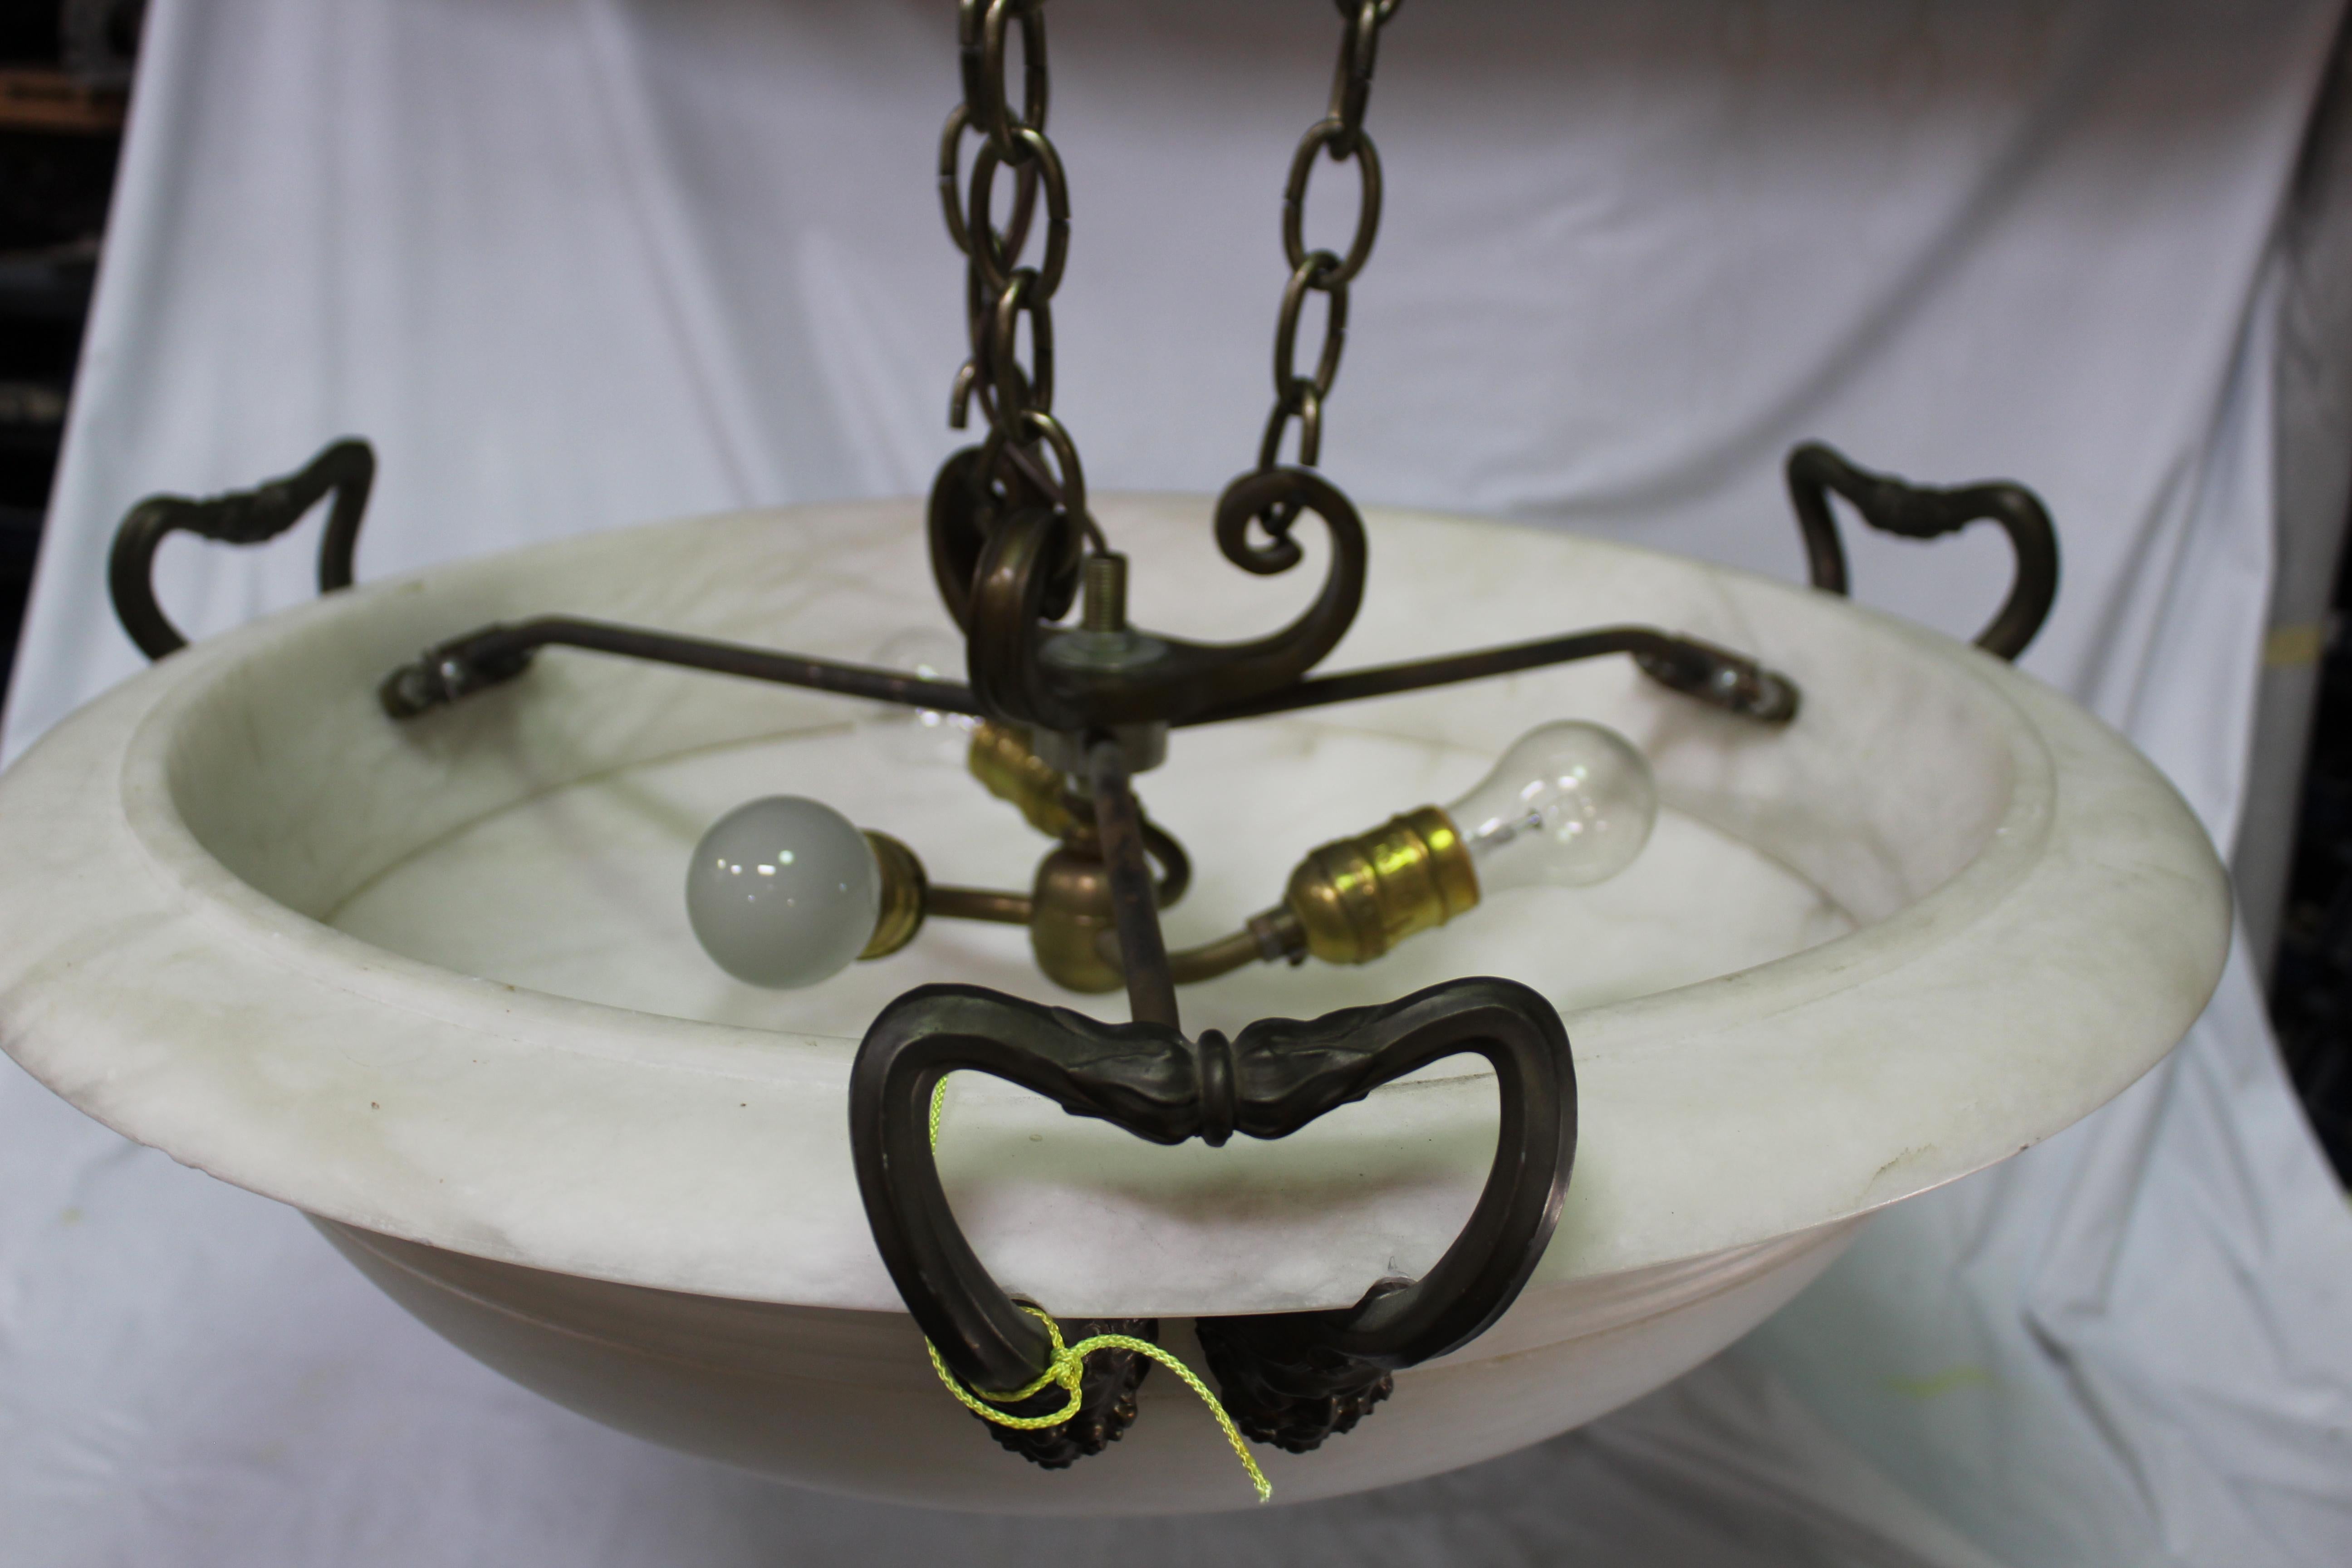 European design Alabaster chandelier with bronze man's face appliques. With 3 handles supported by chains and a bronze cast ceiling cap. Has e light sockets. Appox 24 